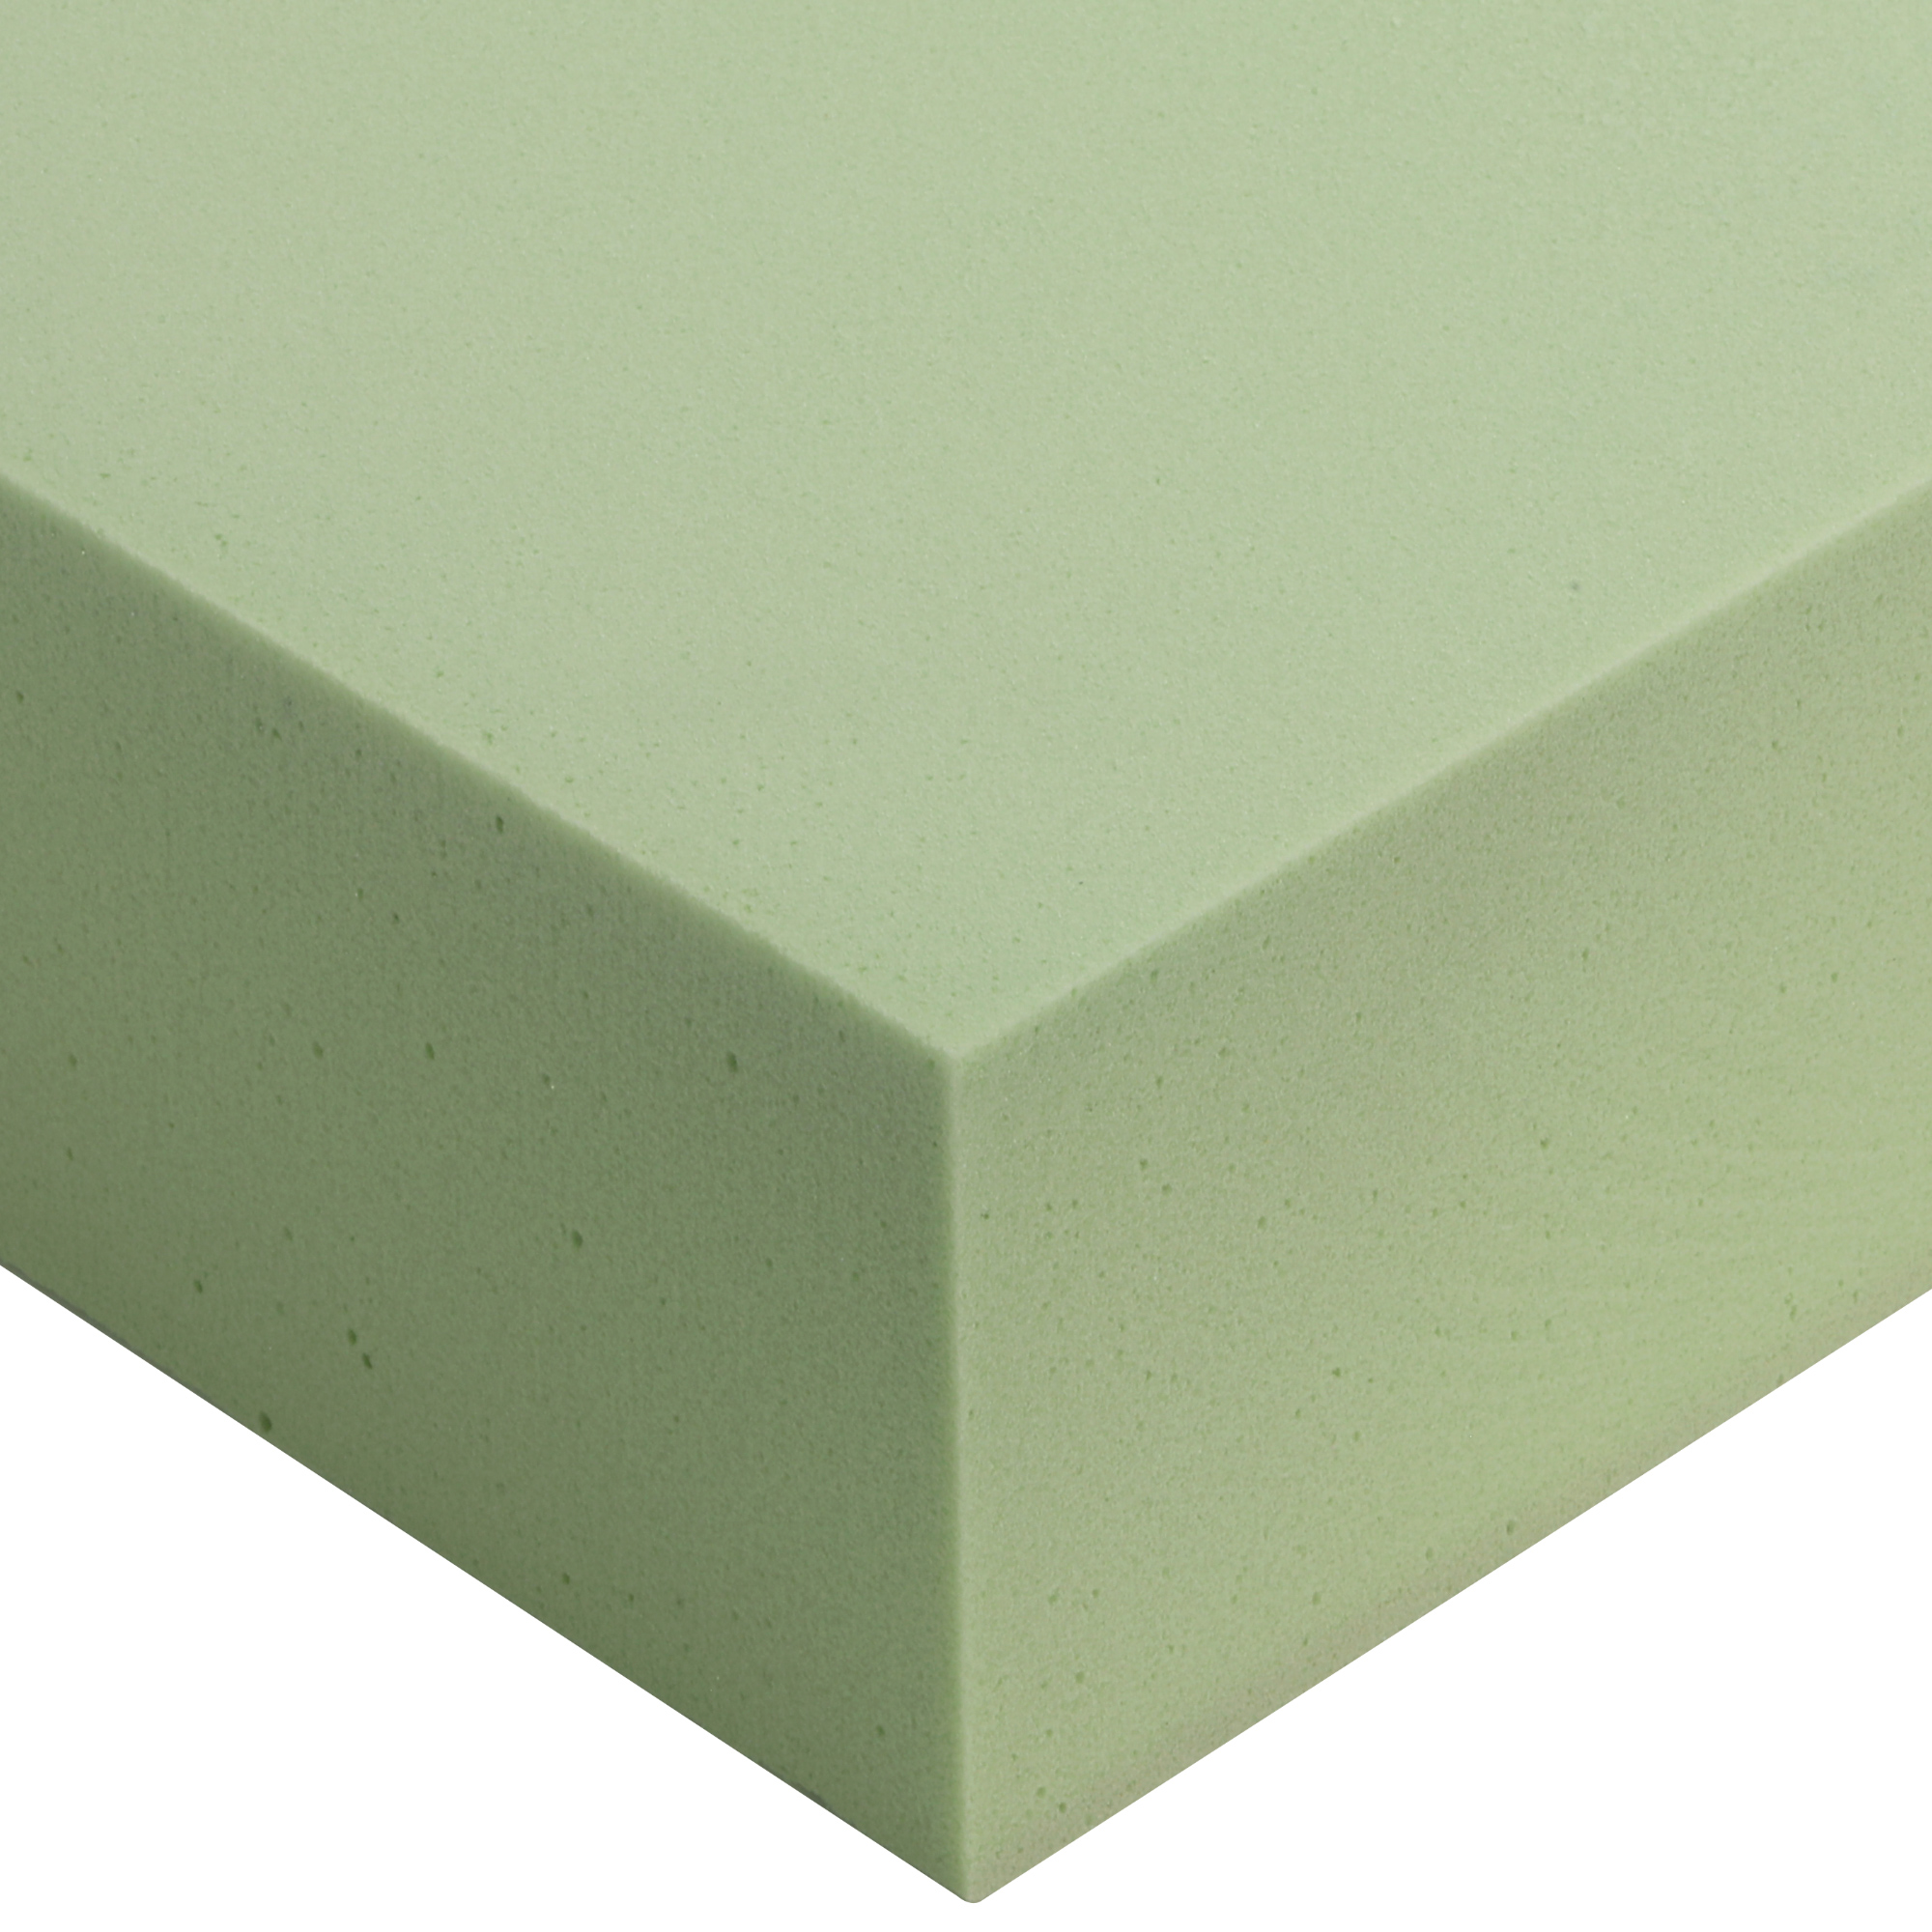 High-density Polyurethane Foam Carving Block Easily Mold Shaped Used by  Artist